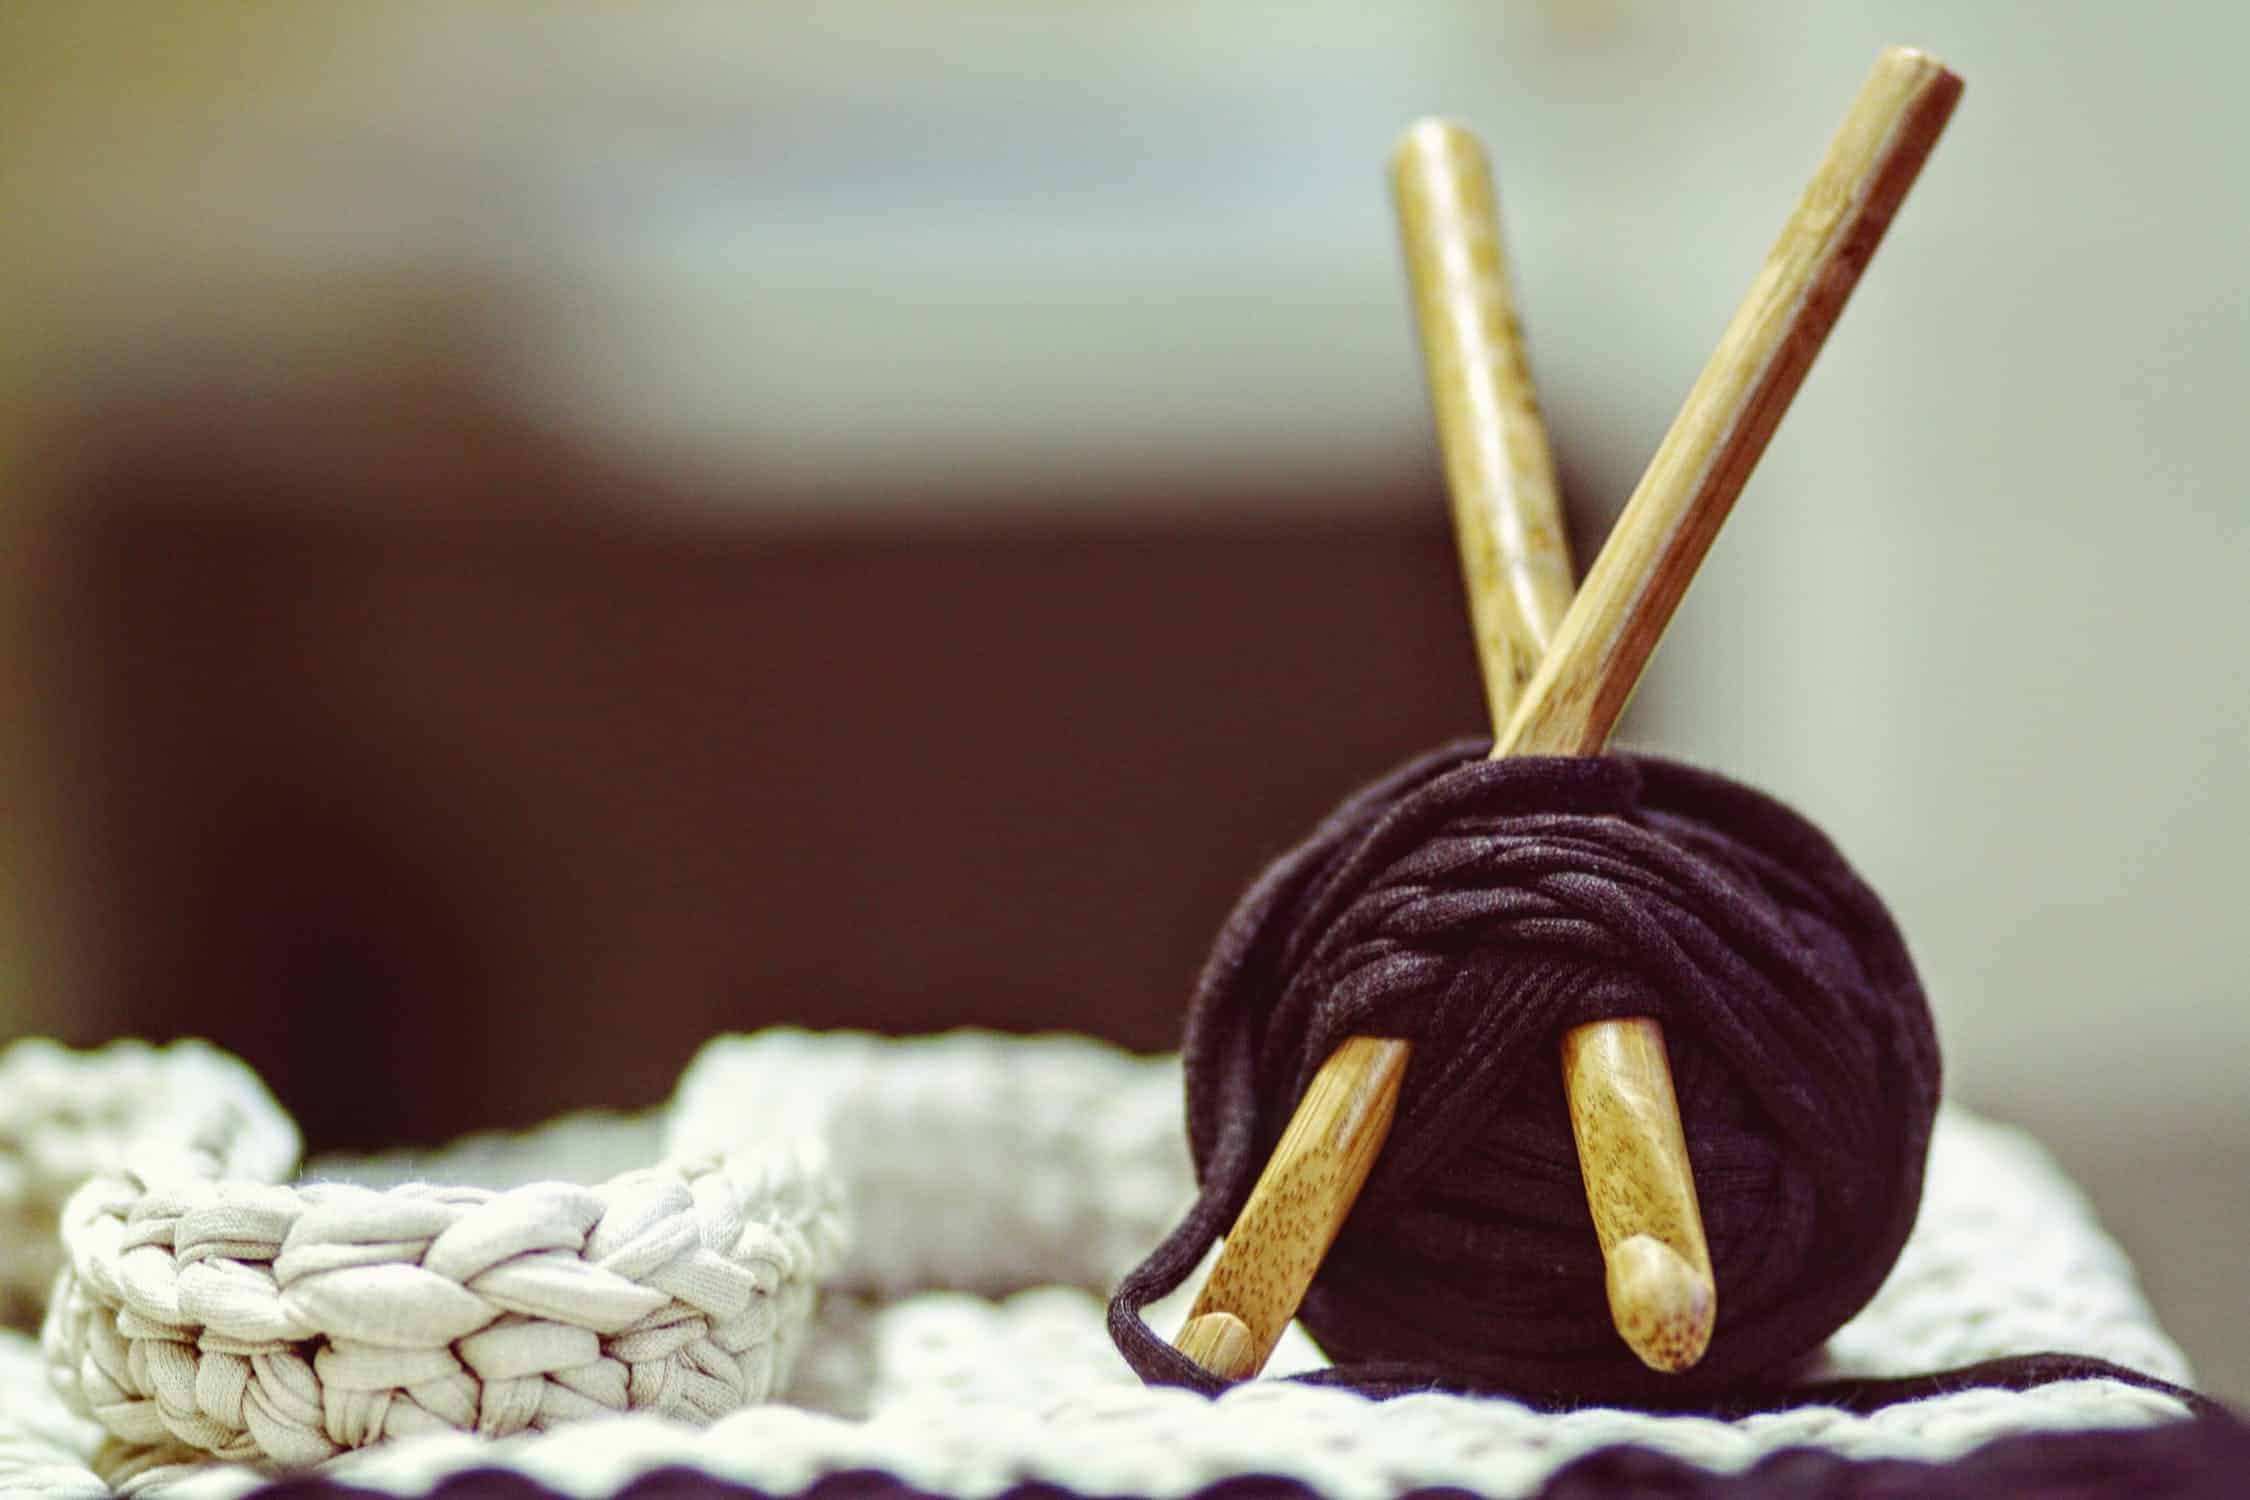 Calligraphy, knitting and woodwork making a comeback as millennials revive artisan skills